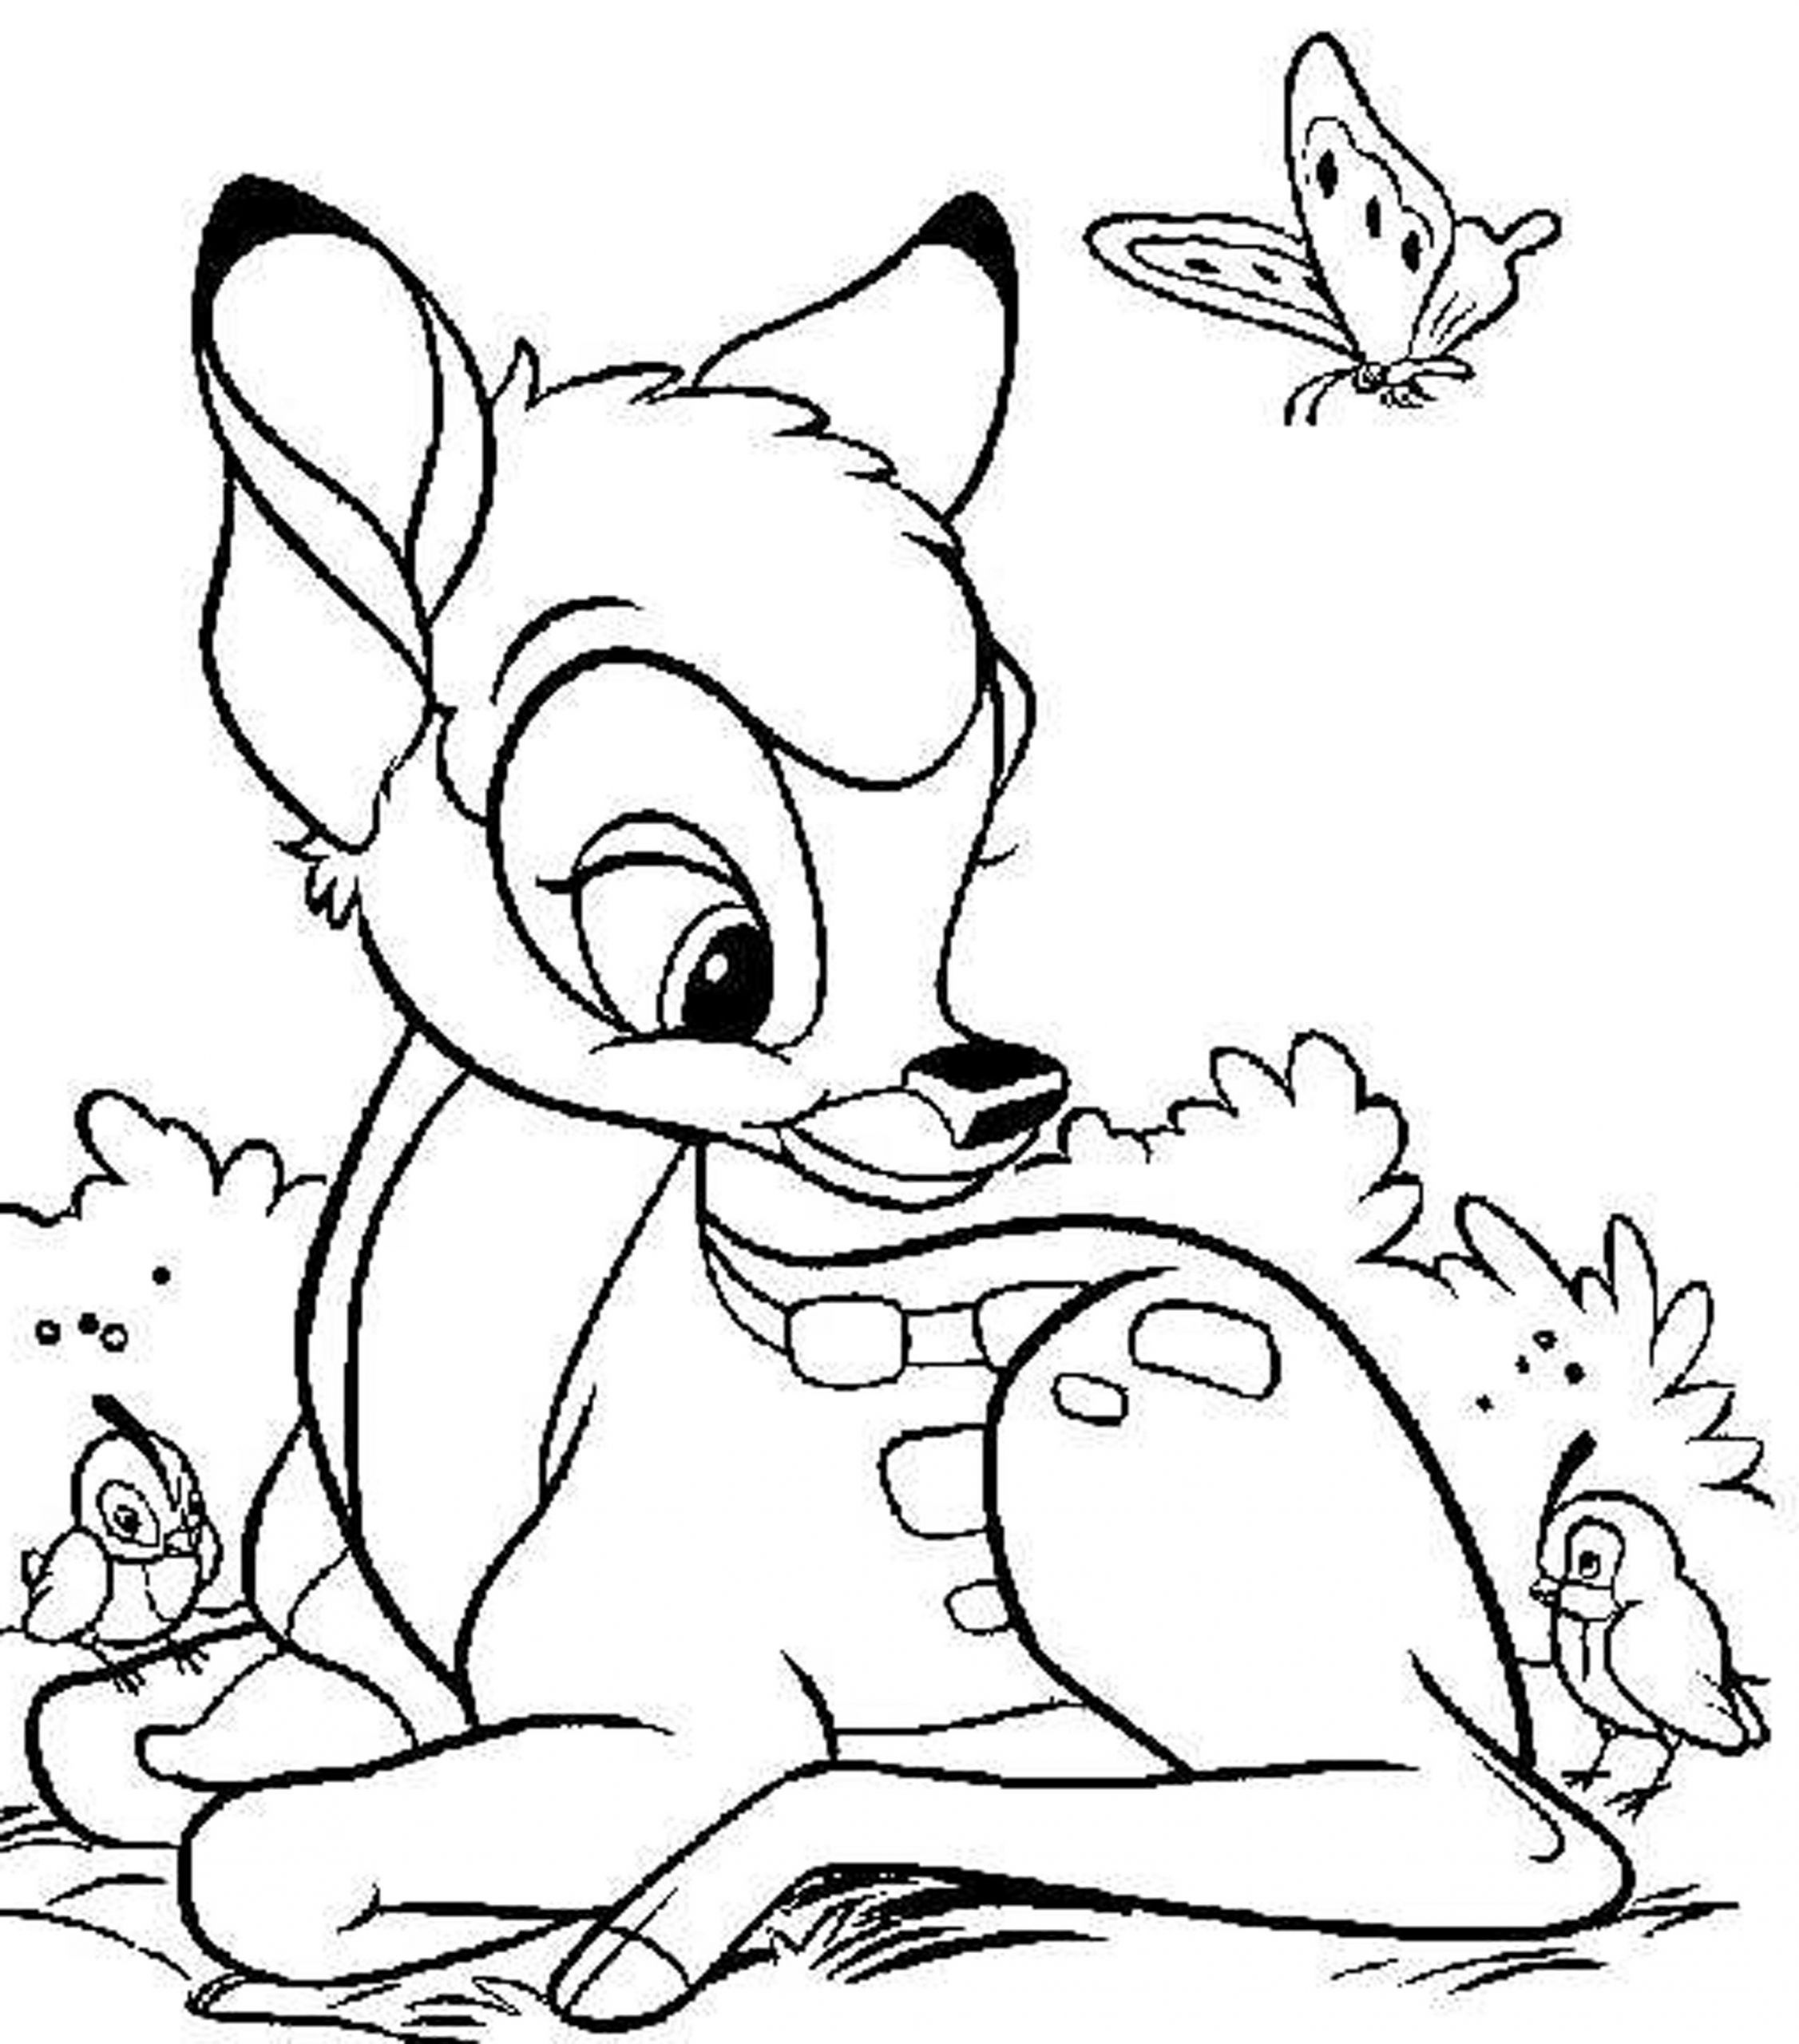 Disney Coloring Pages For Kids To Print Out
 Coloring Pages Awesome Coloring Pages For Kids Disney